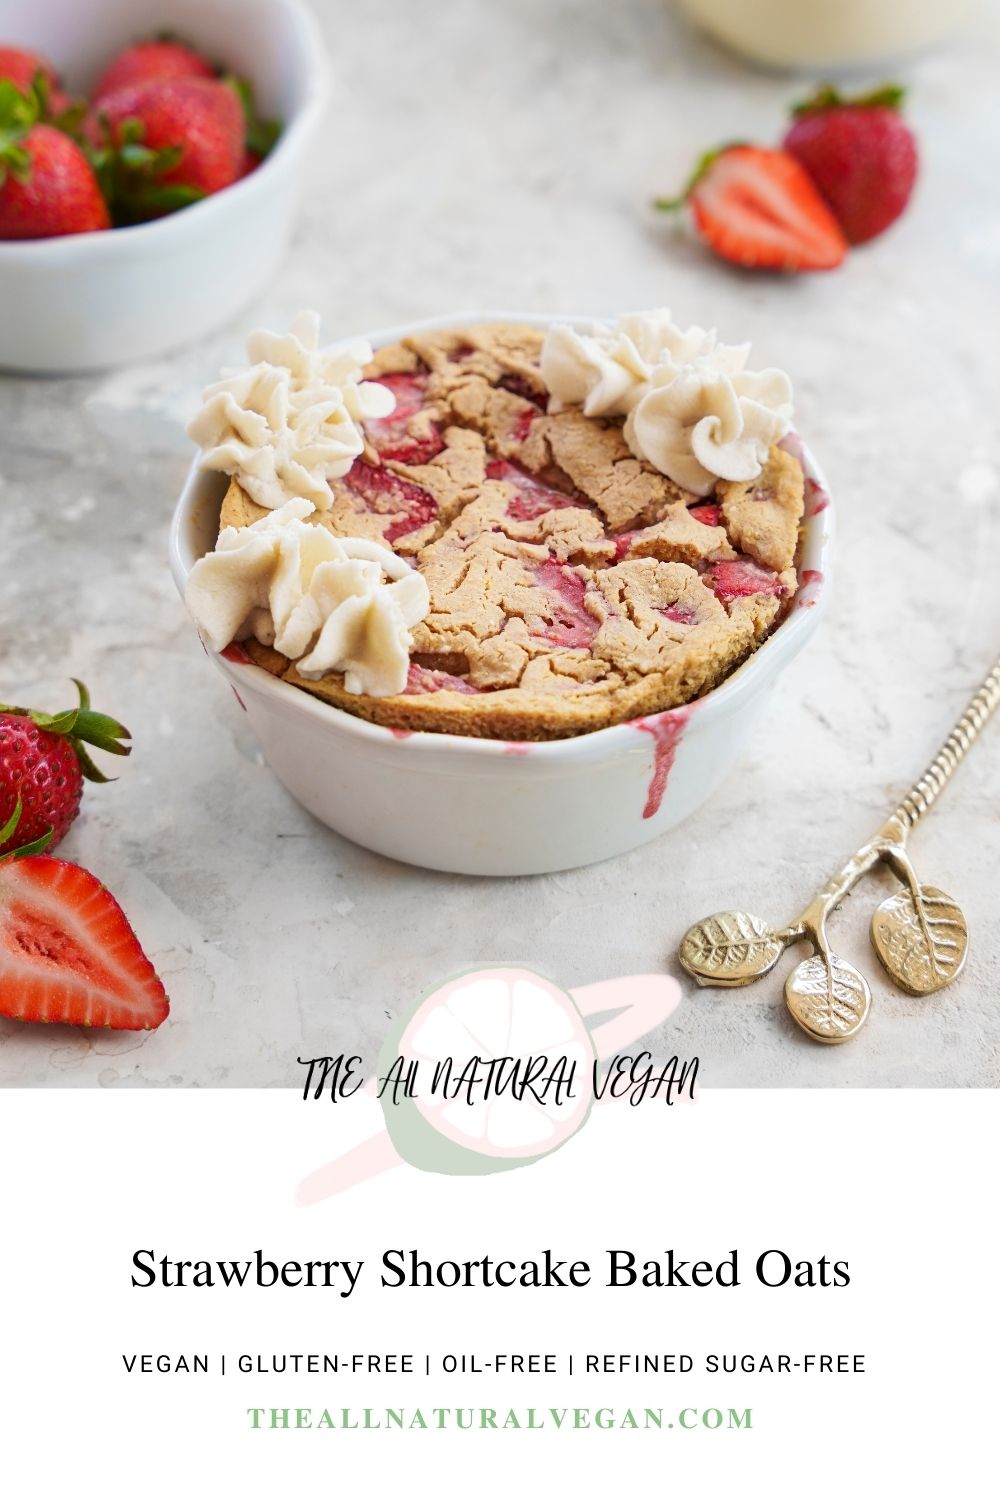 strawberry shortcake baked oats recipe card stating this recipe is vegan, oil-free, gluten-free, and refined sugar-free